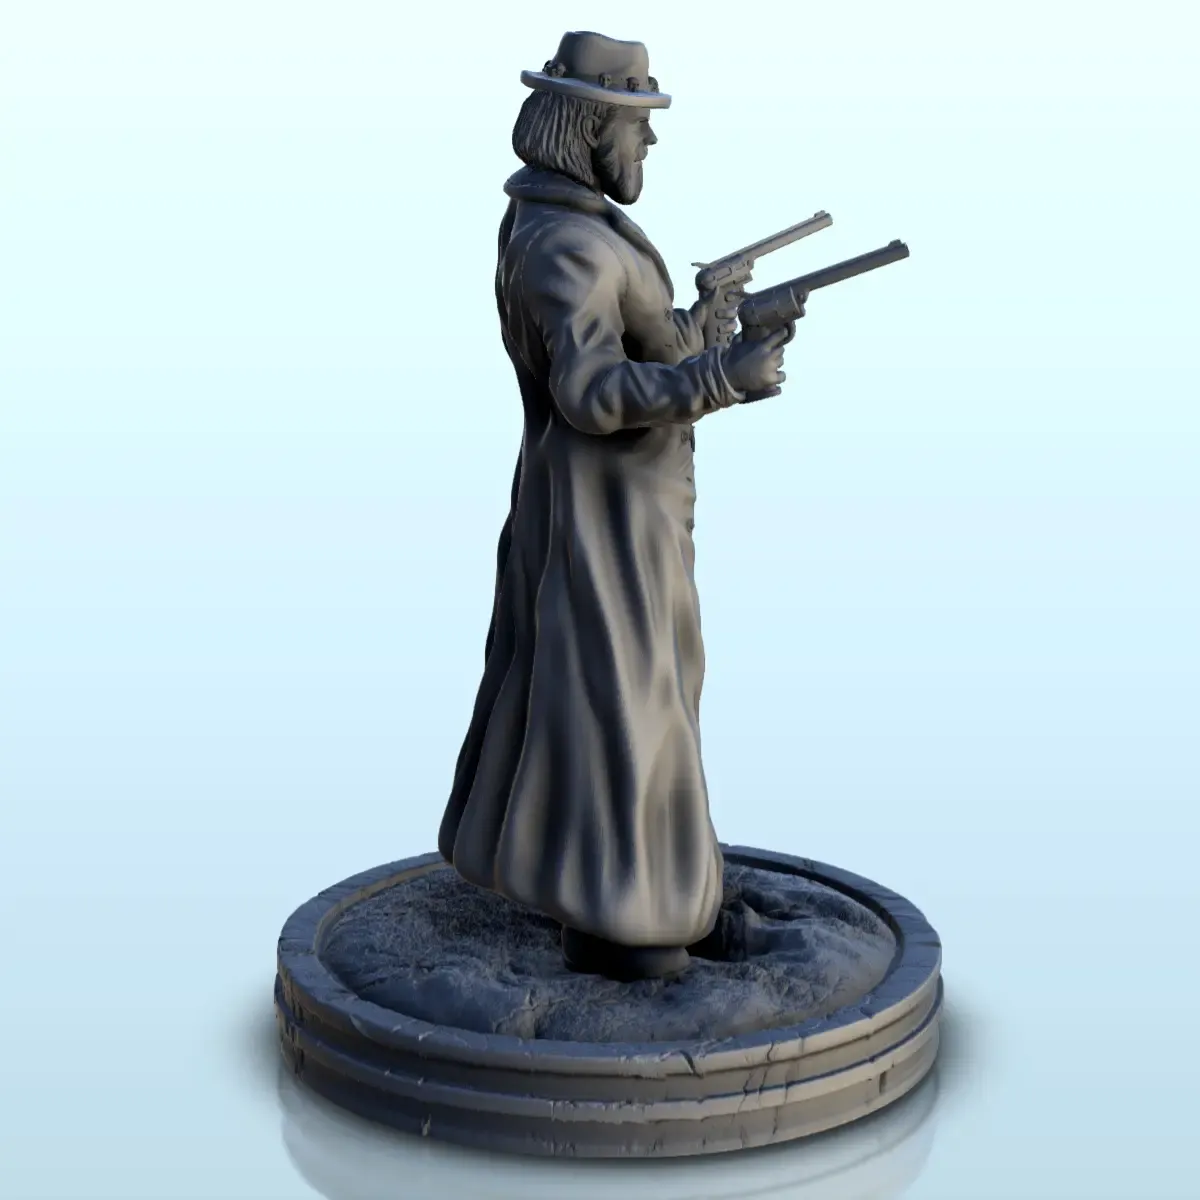 Bandit with coat and two guns (1) - Old West Figure mini